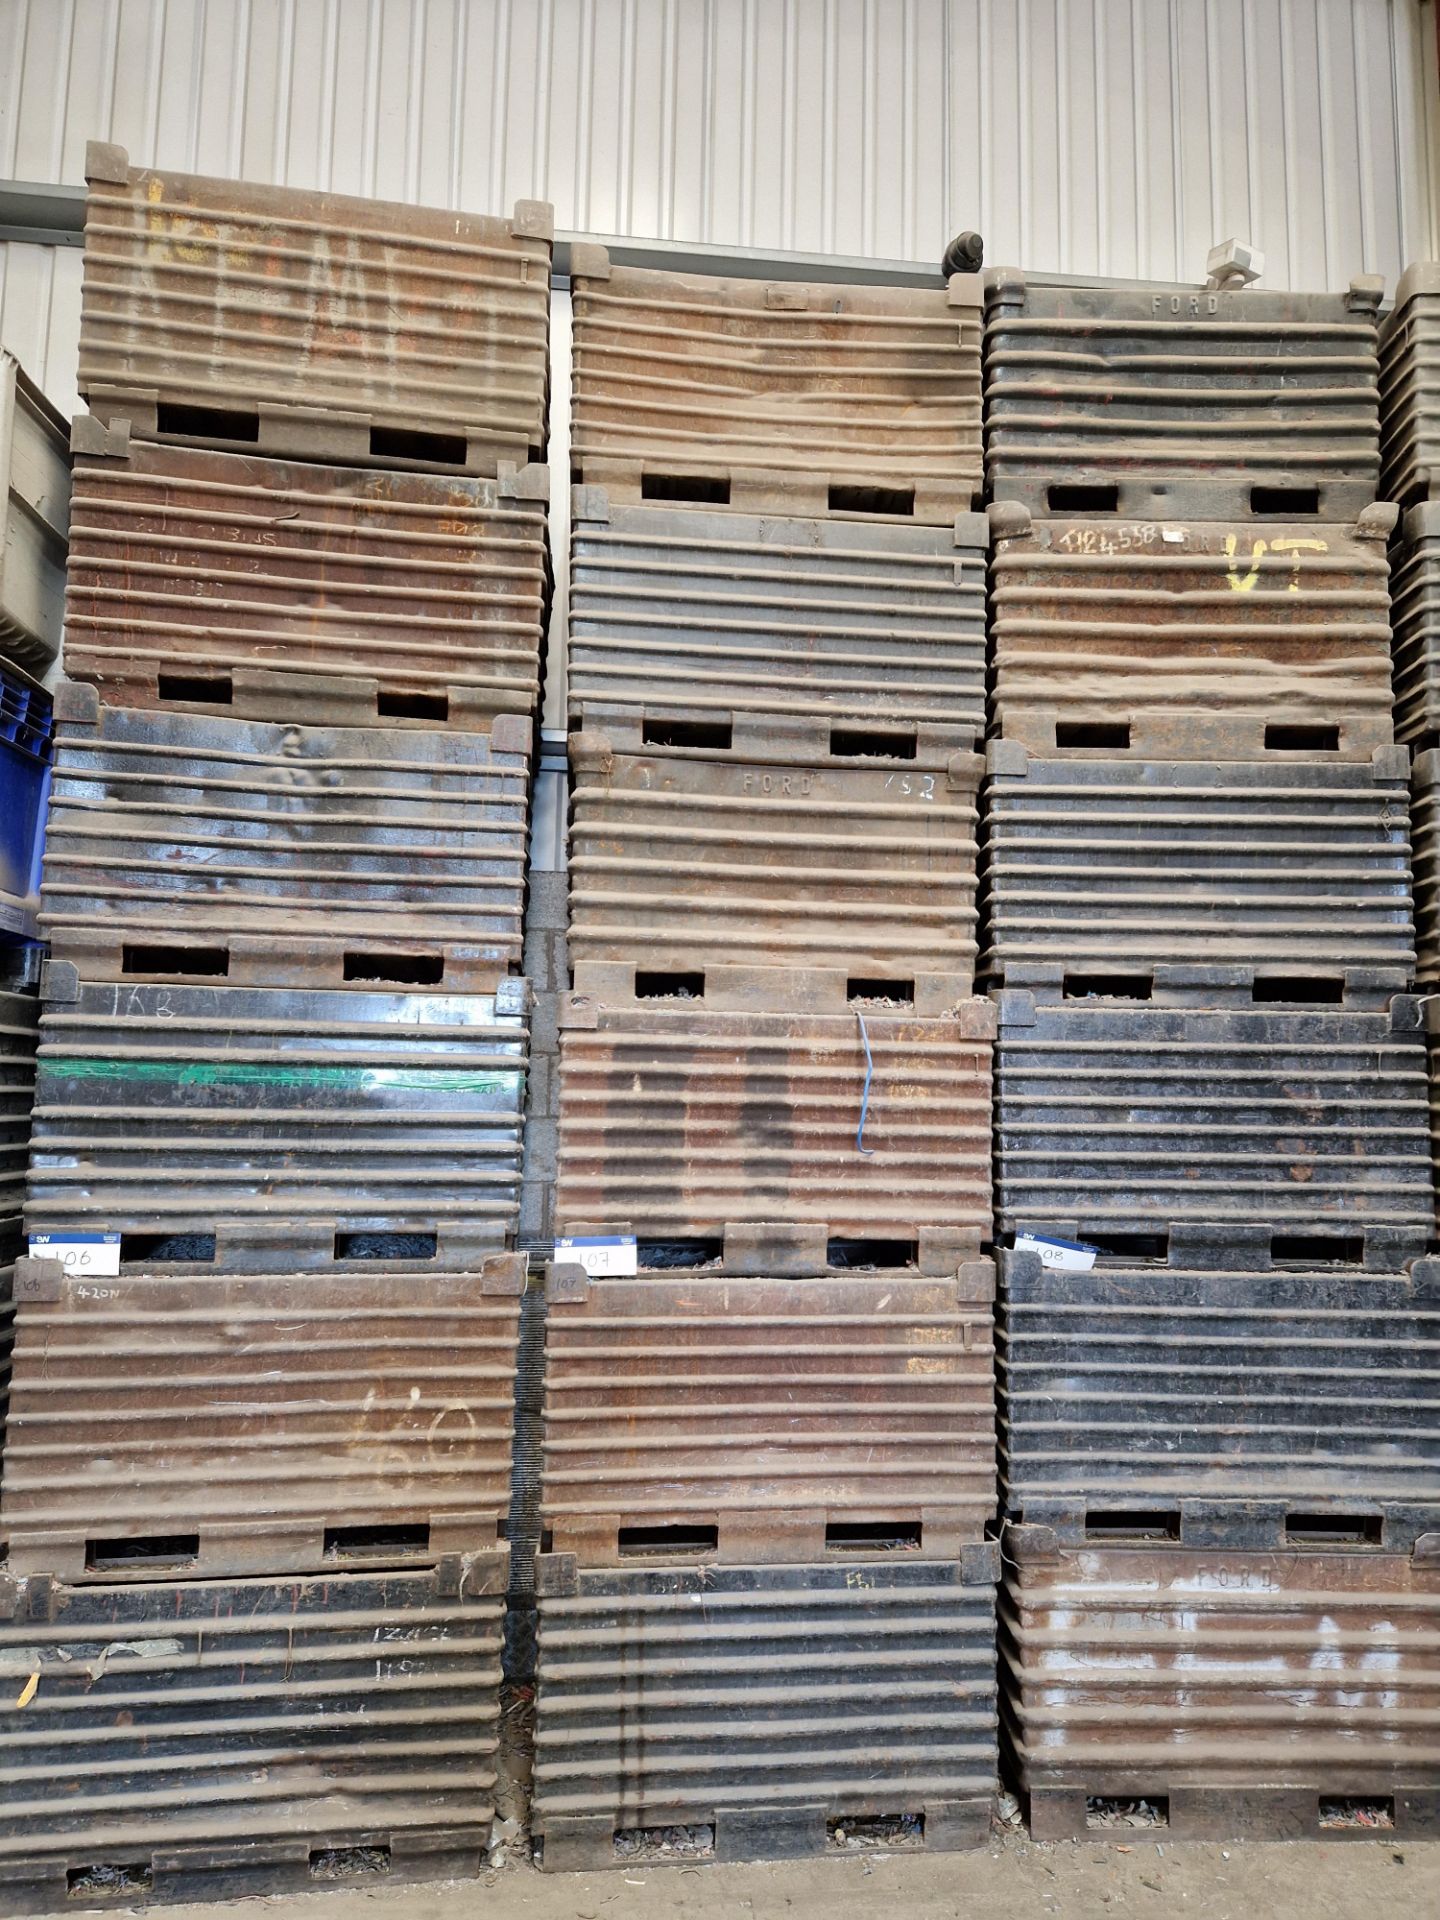 Six Metal Stillages, Approx. 1.2m x 1m x 0.7m (Excluding Contents) (Reserve removal until Tuesday 11